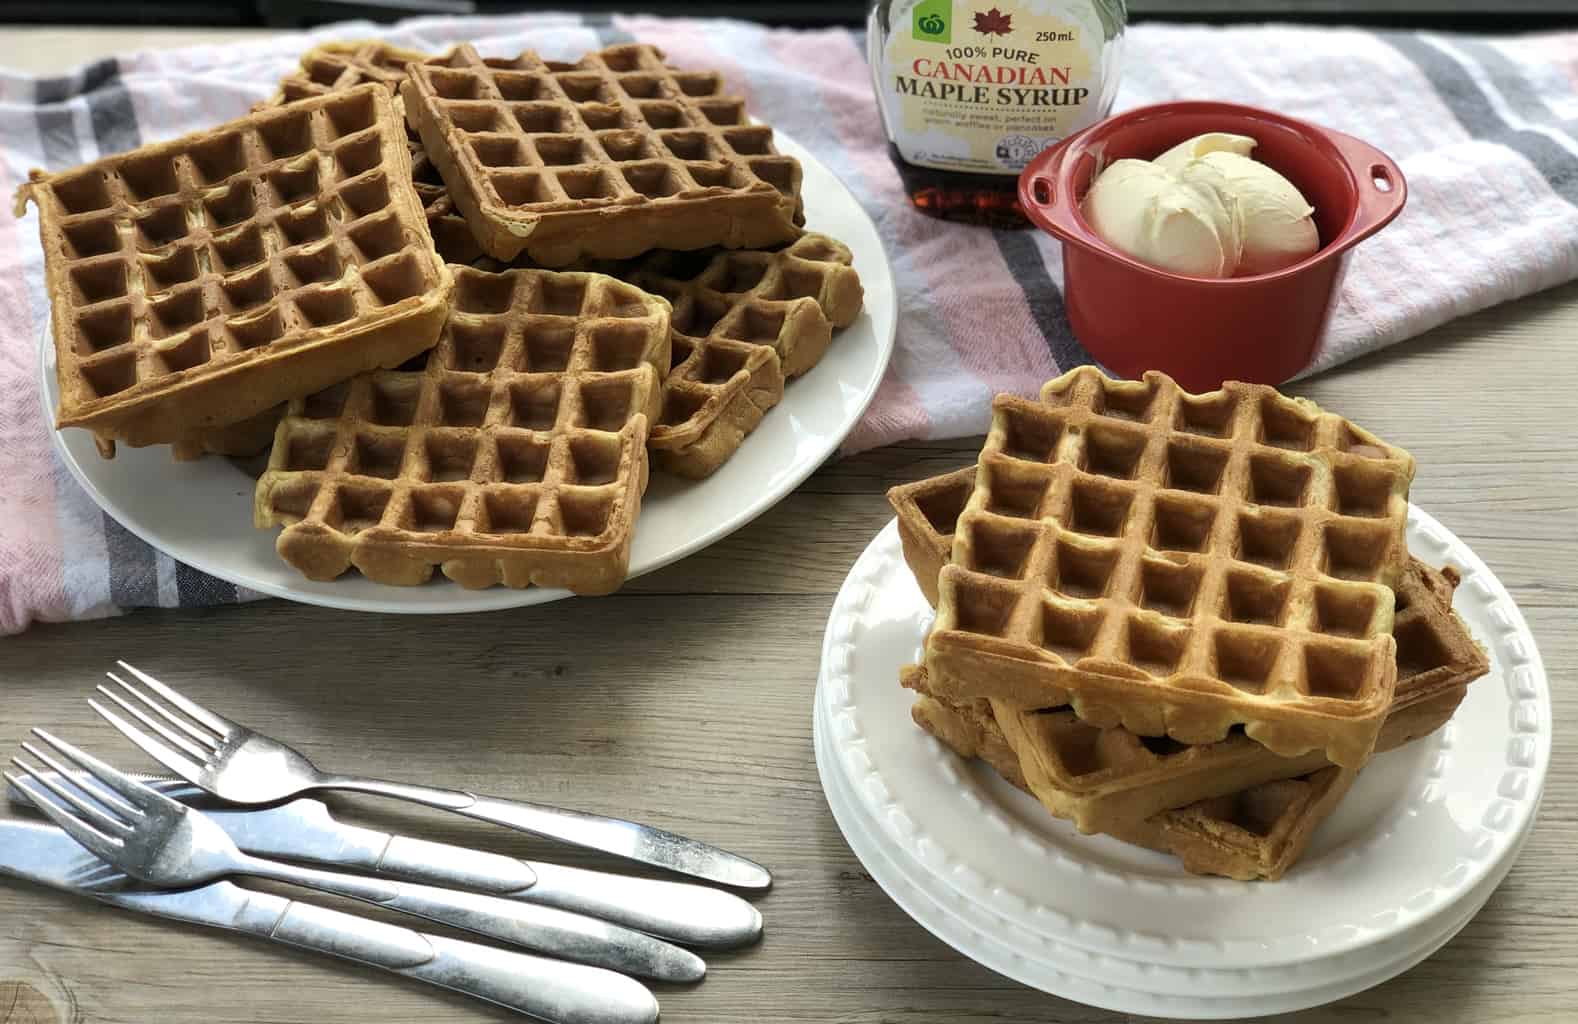 Plates of waffles with a bottle of Canadian maple syrup and a bowl of cream 